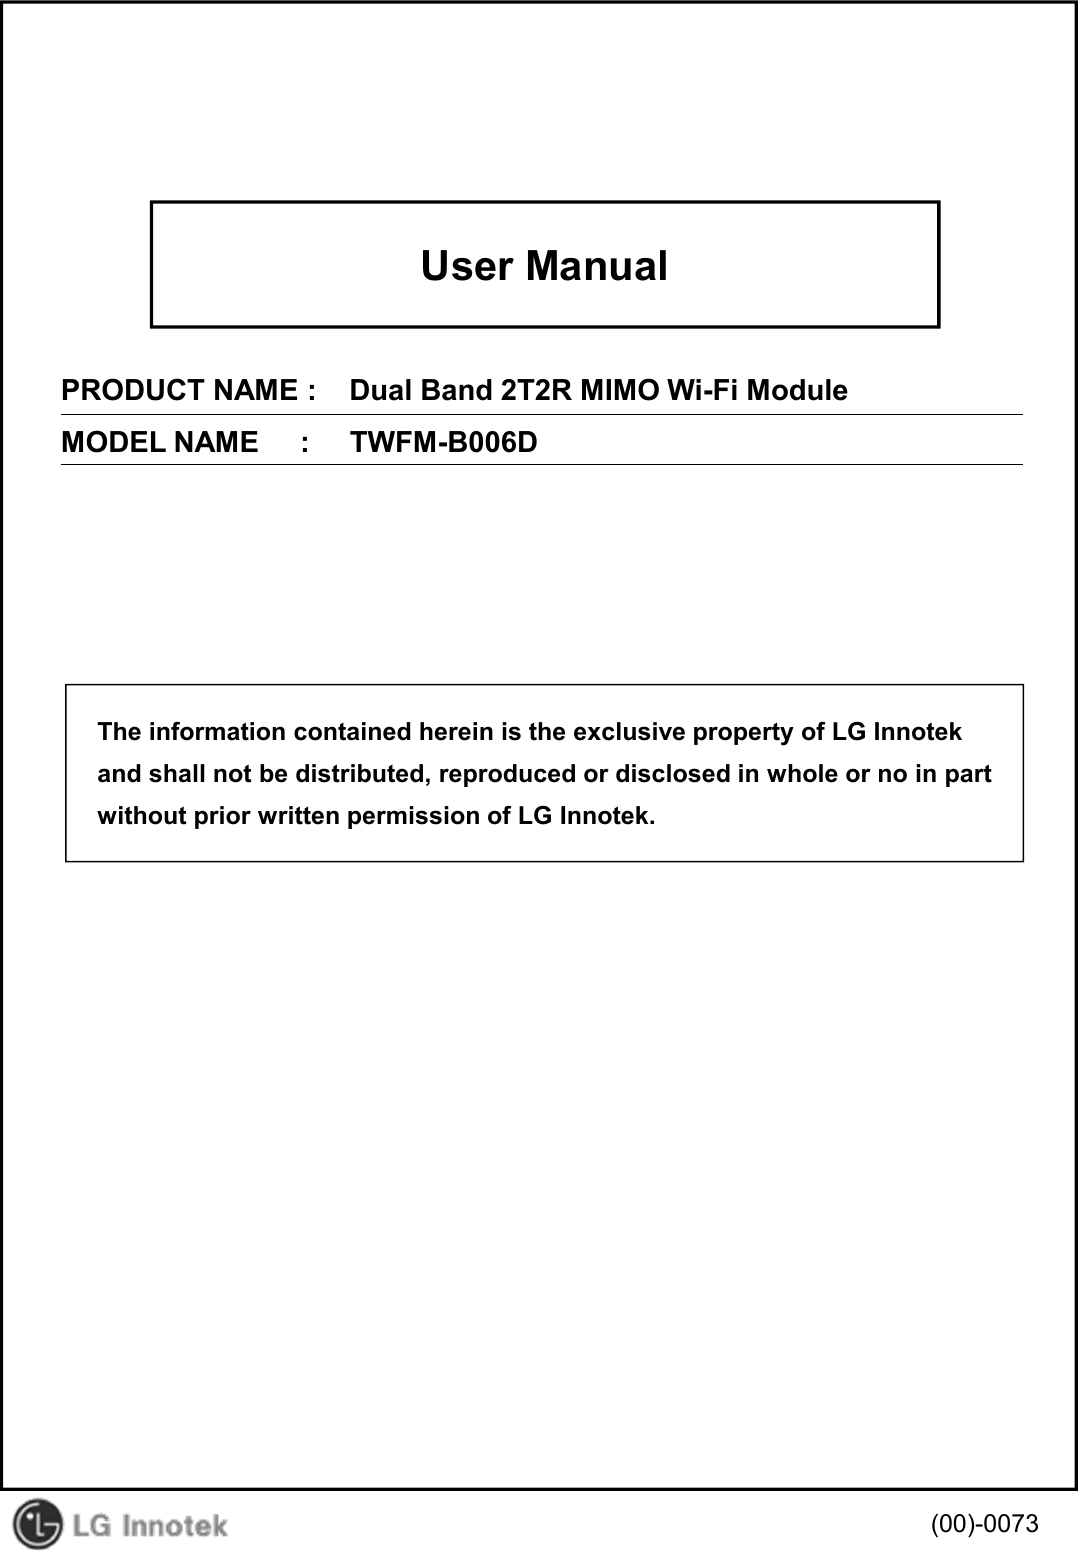 User ManualPRODUCT NAME :    Dual Band 2T2R MIMO Wi-Fi ModuleMODEL NAME     :     TWFM-B006D(00)-0073The information contained herein is the exclusive property of LG Innotekand shall not be distributed, reproduced or disclosed in whole or no in partwithout prior written permission of LG Innotek.